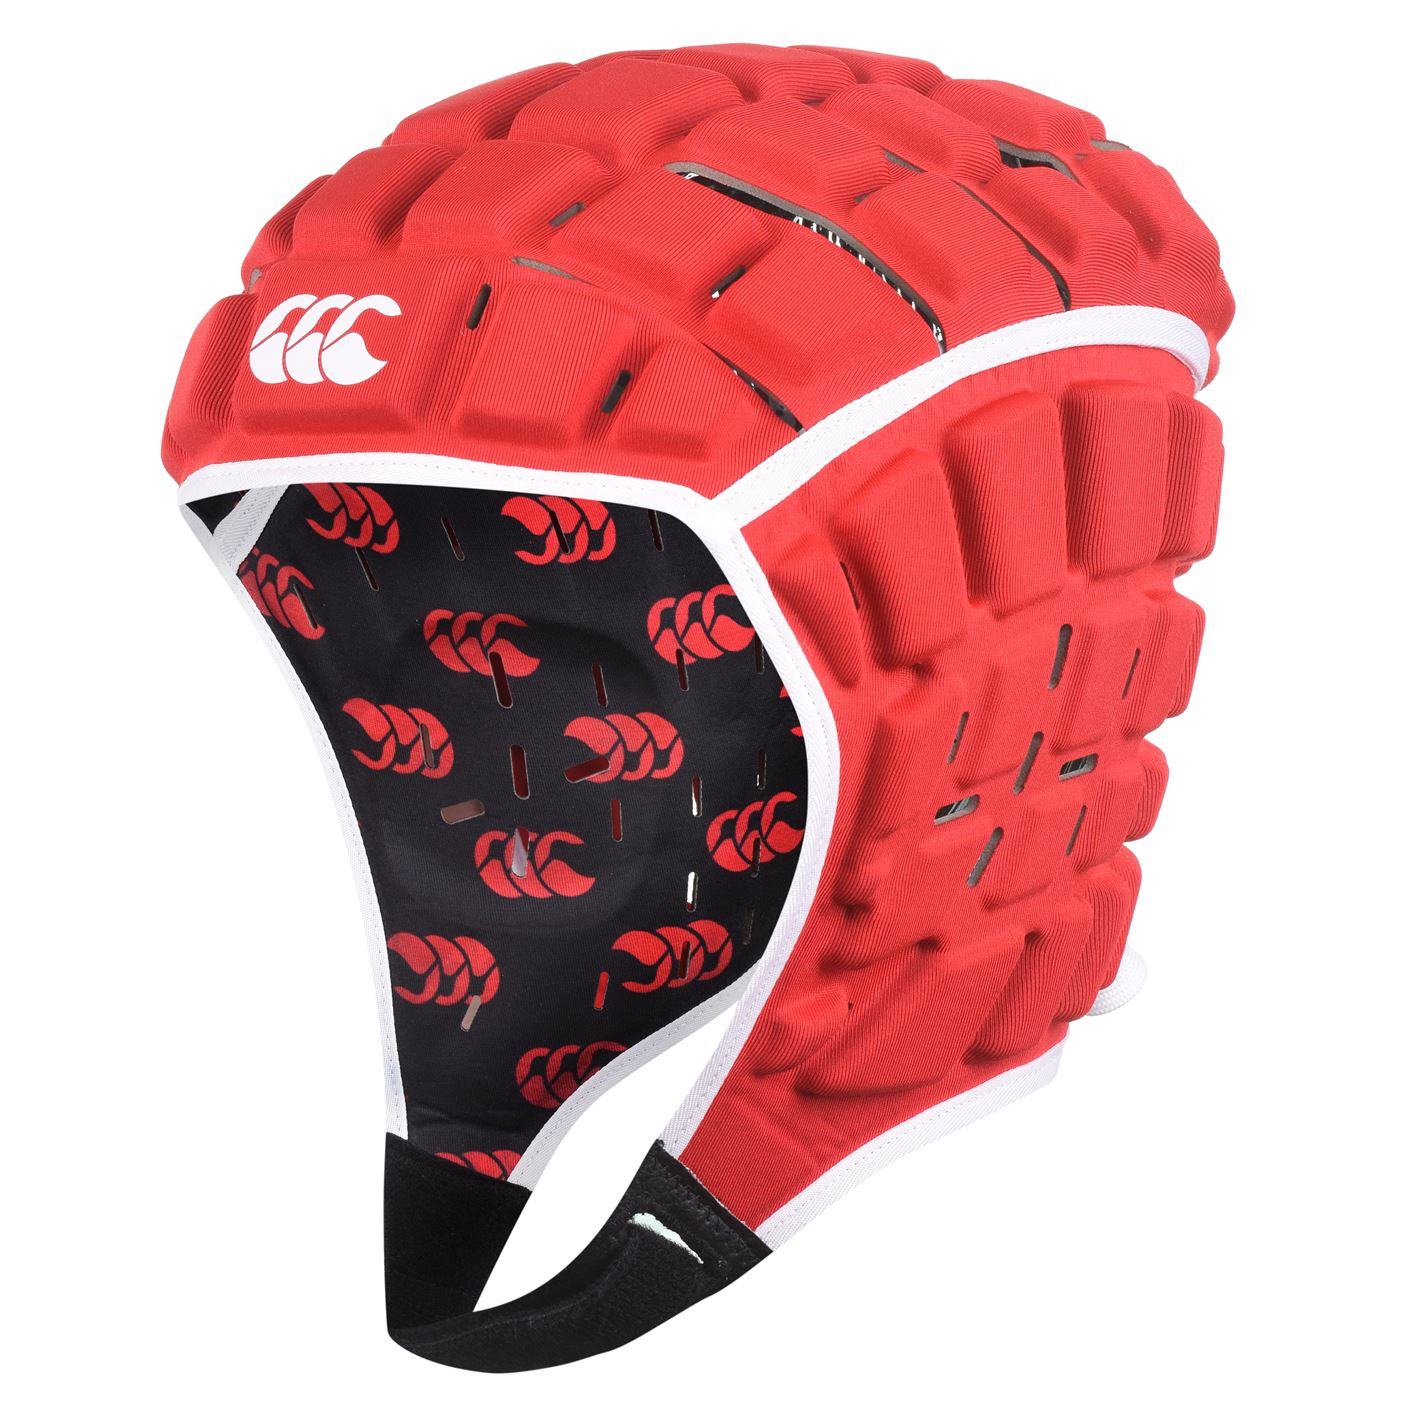 Casca protectie Canterbury Reinforcer Rugby rosu